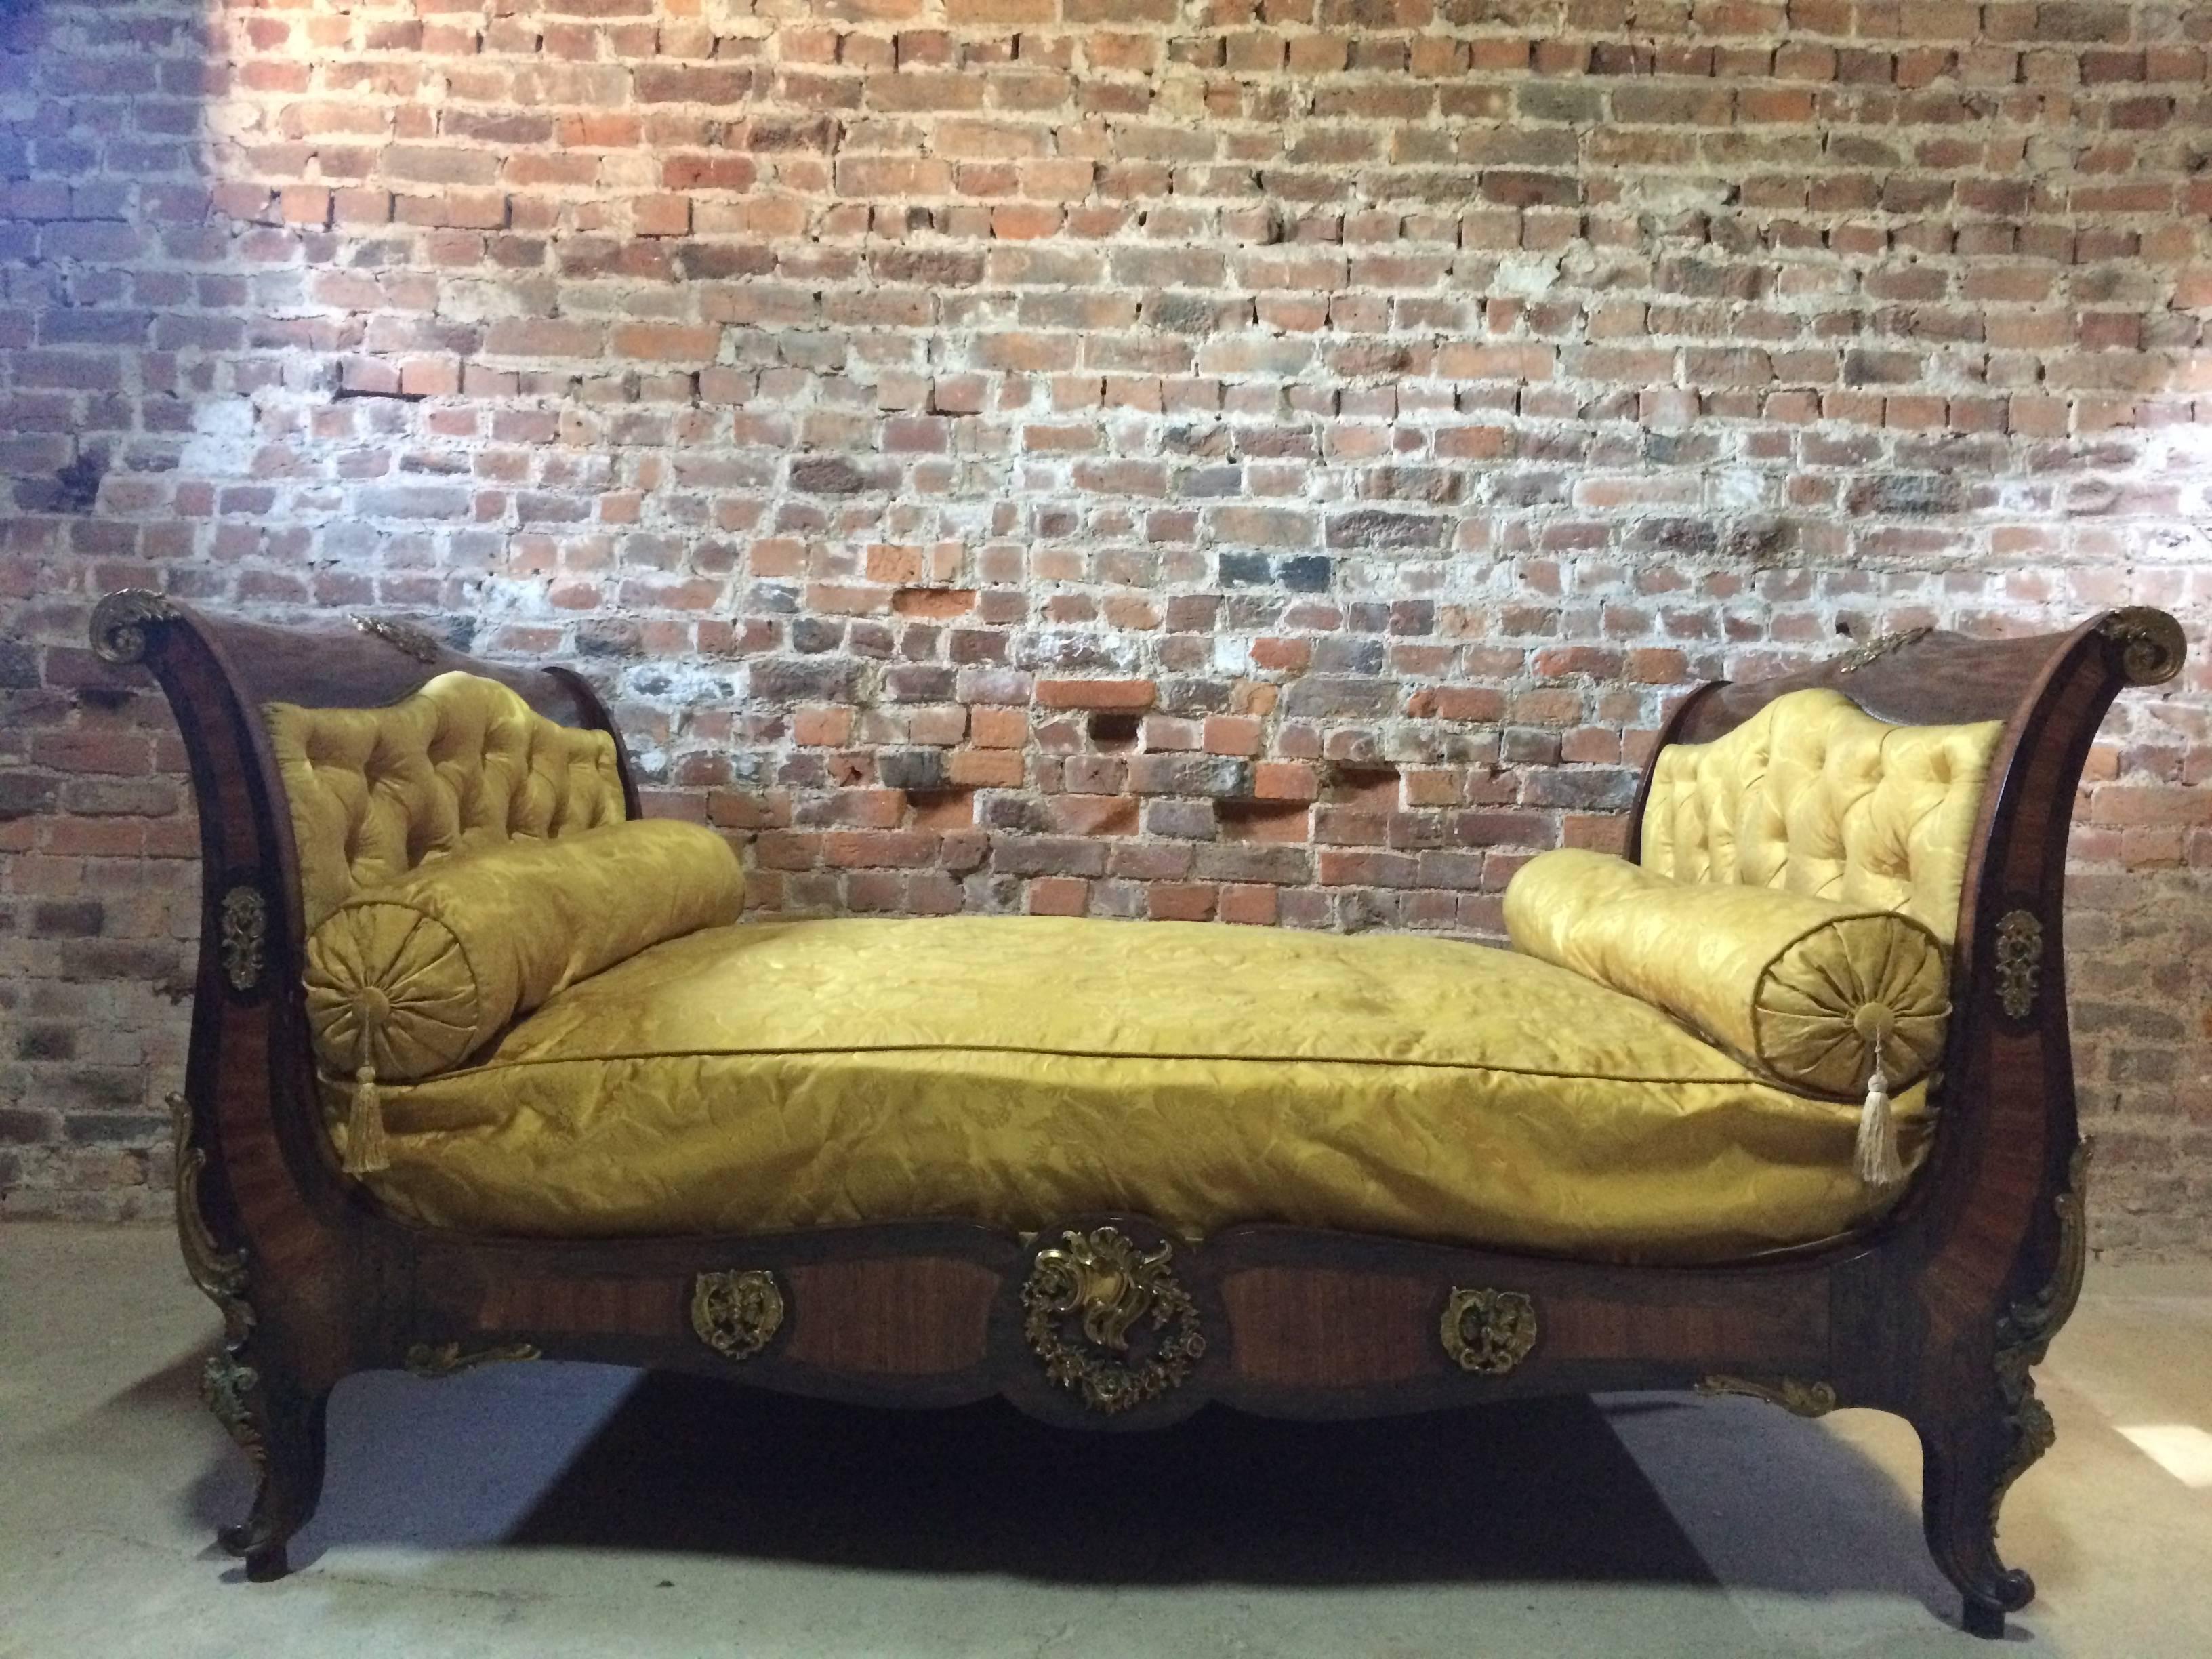 Cross-Banded Antique Daybed Bed Lit en Bateau French Louis XV Style 19th Century, circa 1815